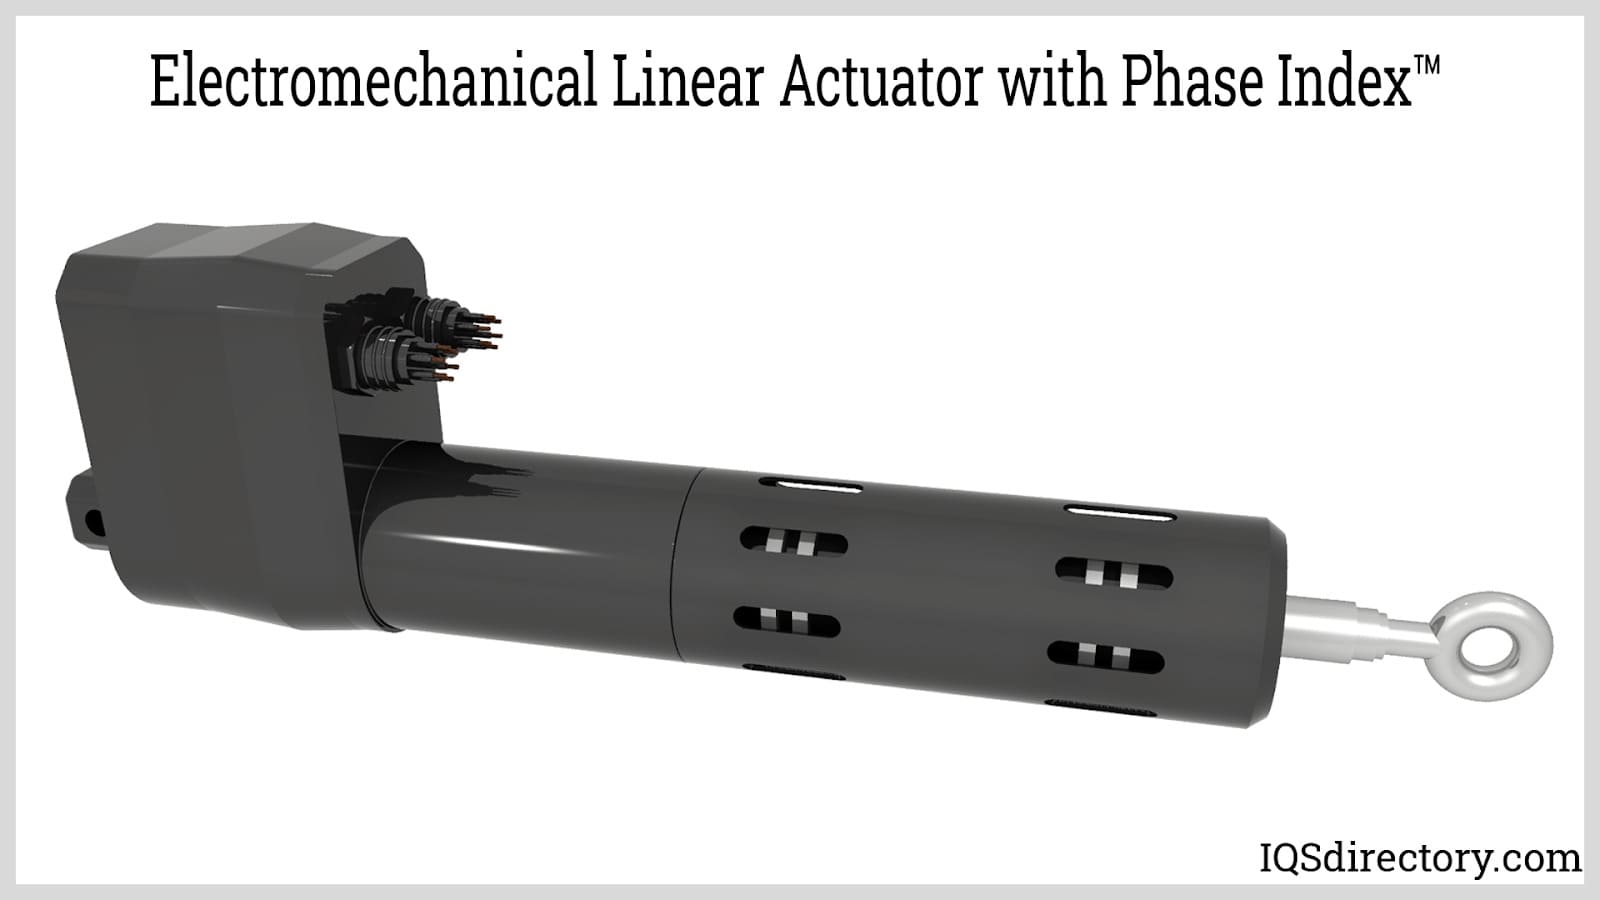 Electromechanical Linear Actuator with Phase Index